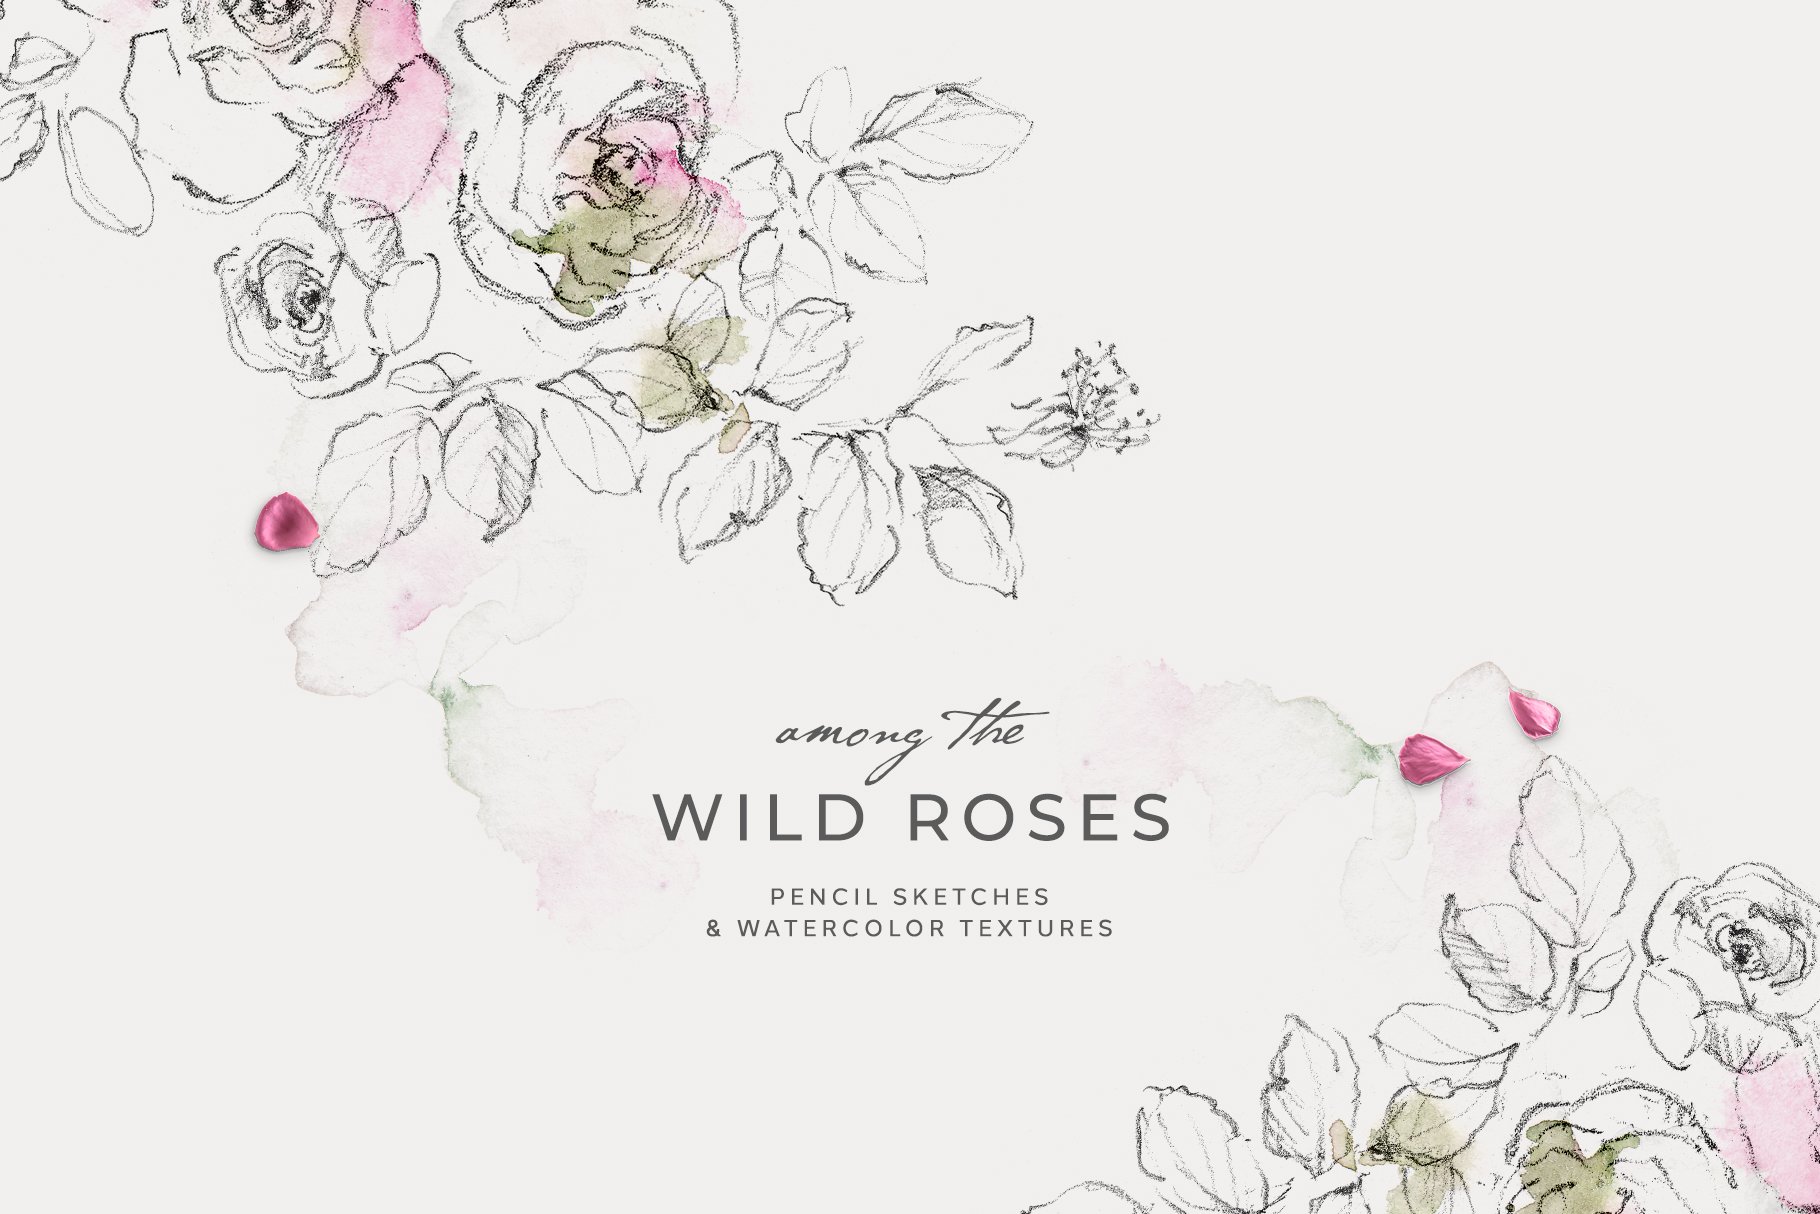 Wild Rose Pencil Sketches cover image.